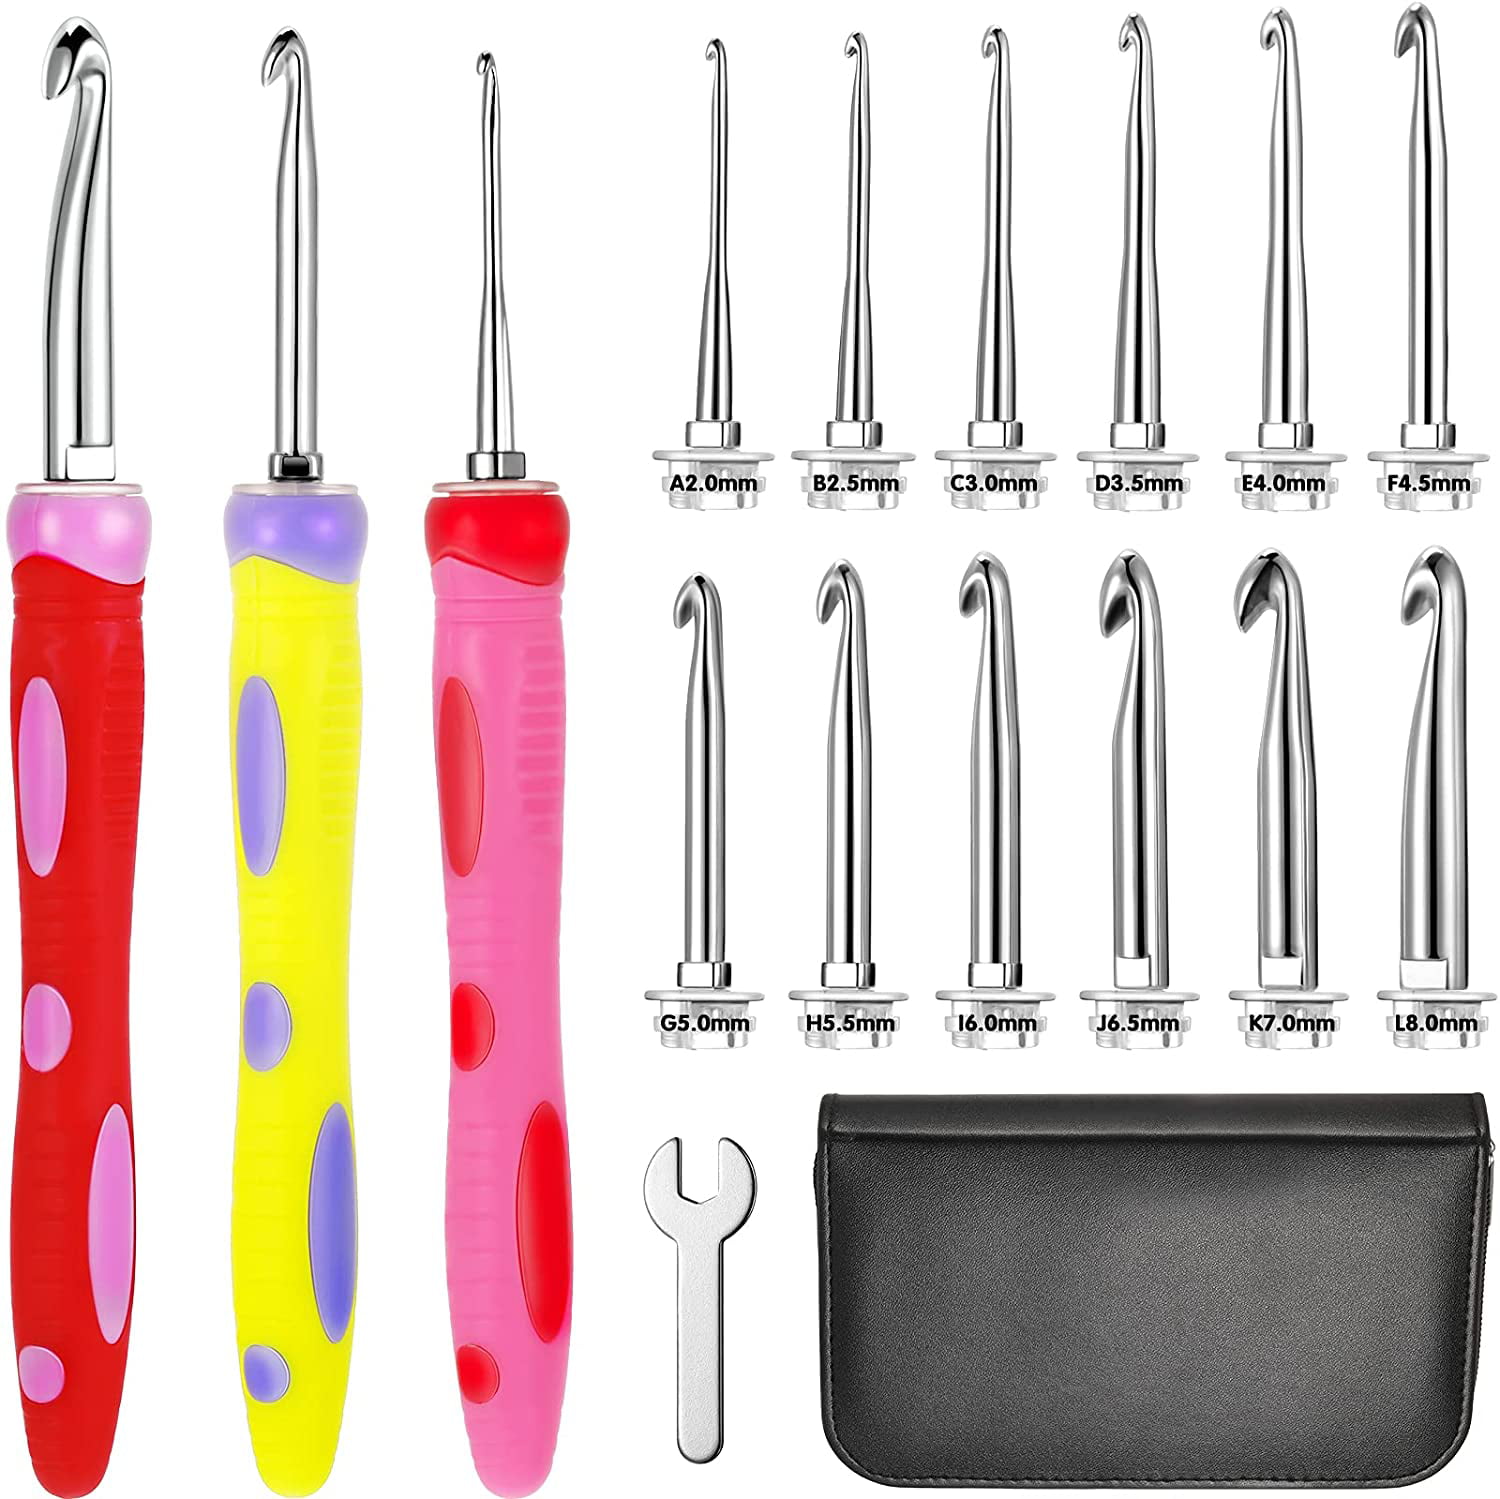 Beautiful Ergonomic And Interchangeable Crochet Hook Set Crafty Person Fiber Artist Gift For Crocheter Acrylic Handle With Hearts Design